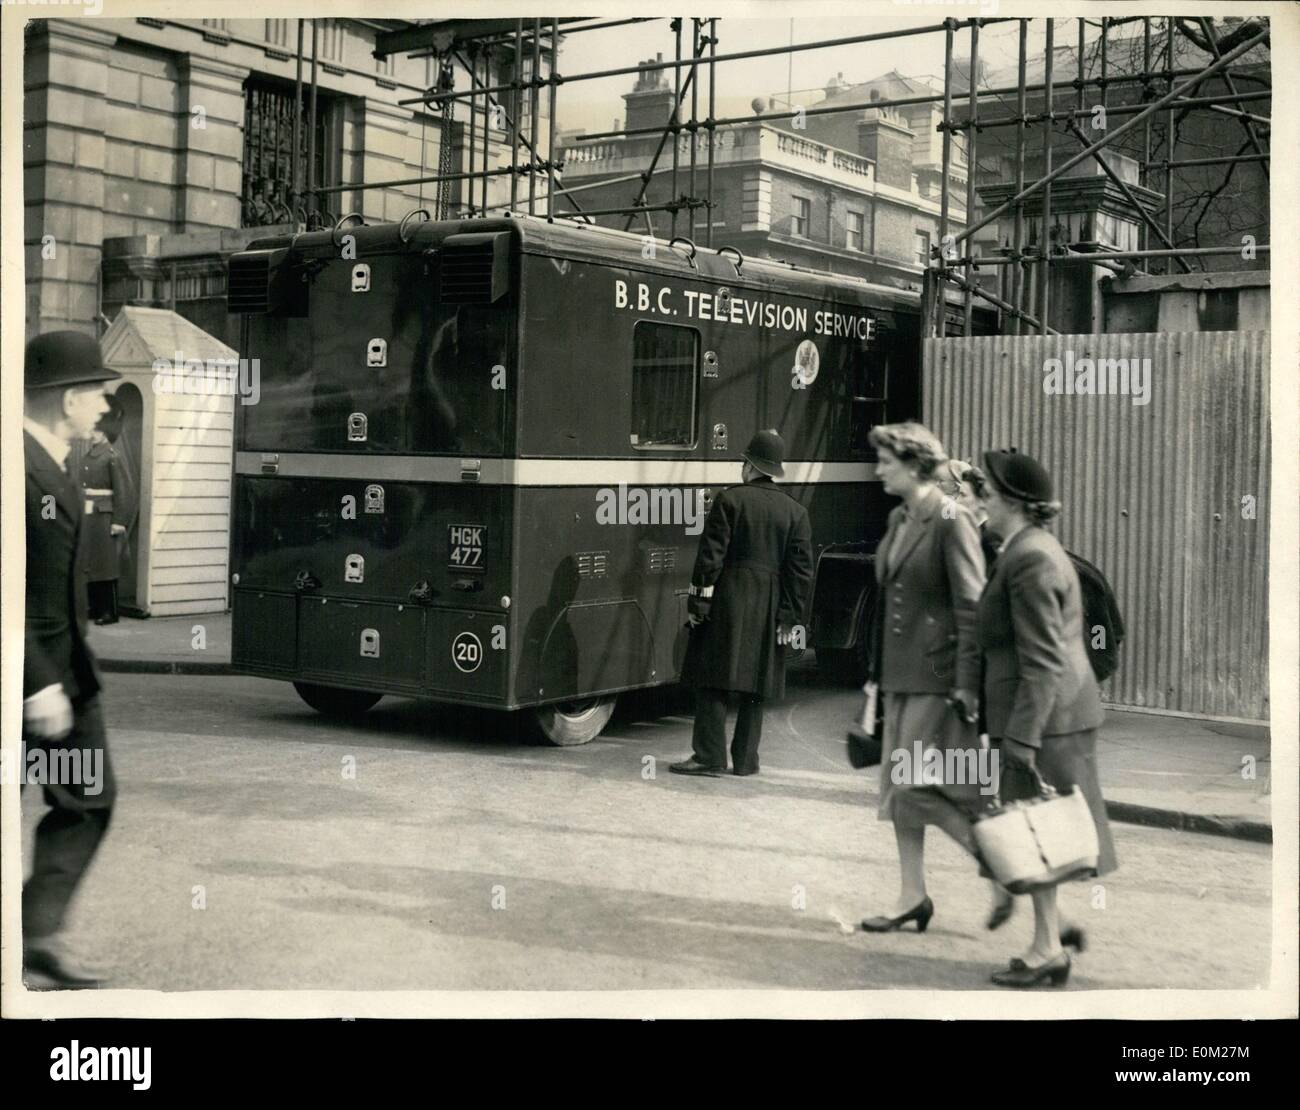 Mar. 03, 1953 - Scenes in London after death of Queen Mary. B.B.C. television van goes to Marlborough house. Photo shows the scene this afternoon as a B.B.C. television van drives into the grounds of Marlborough House following the death of Queen Mary. Stock Photo